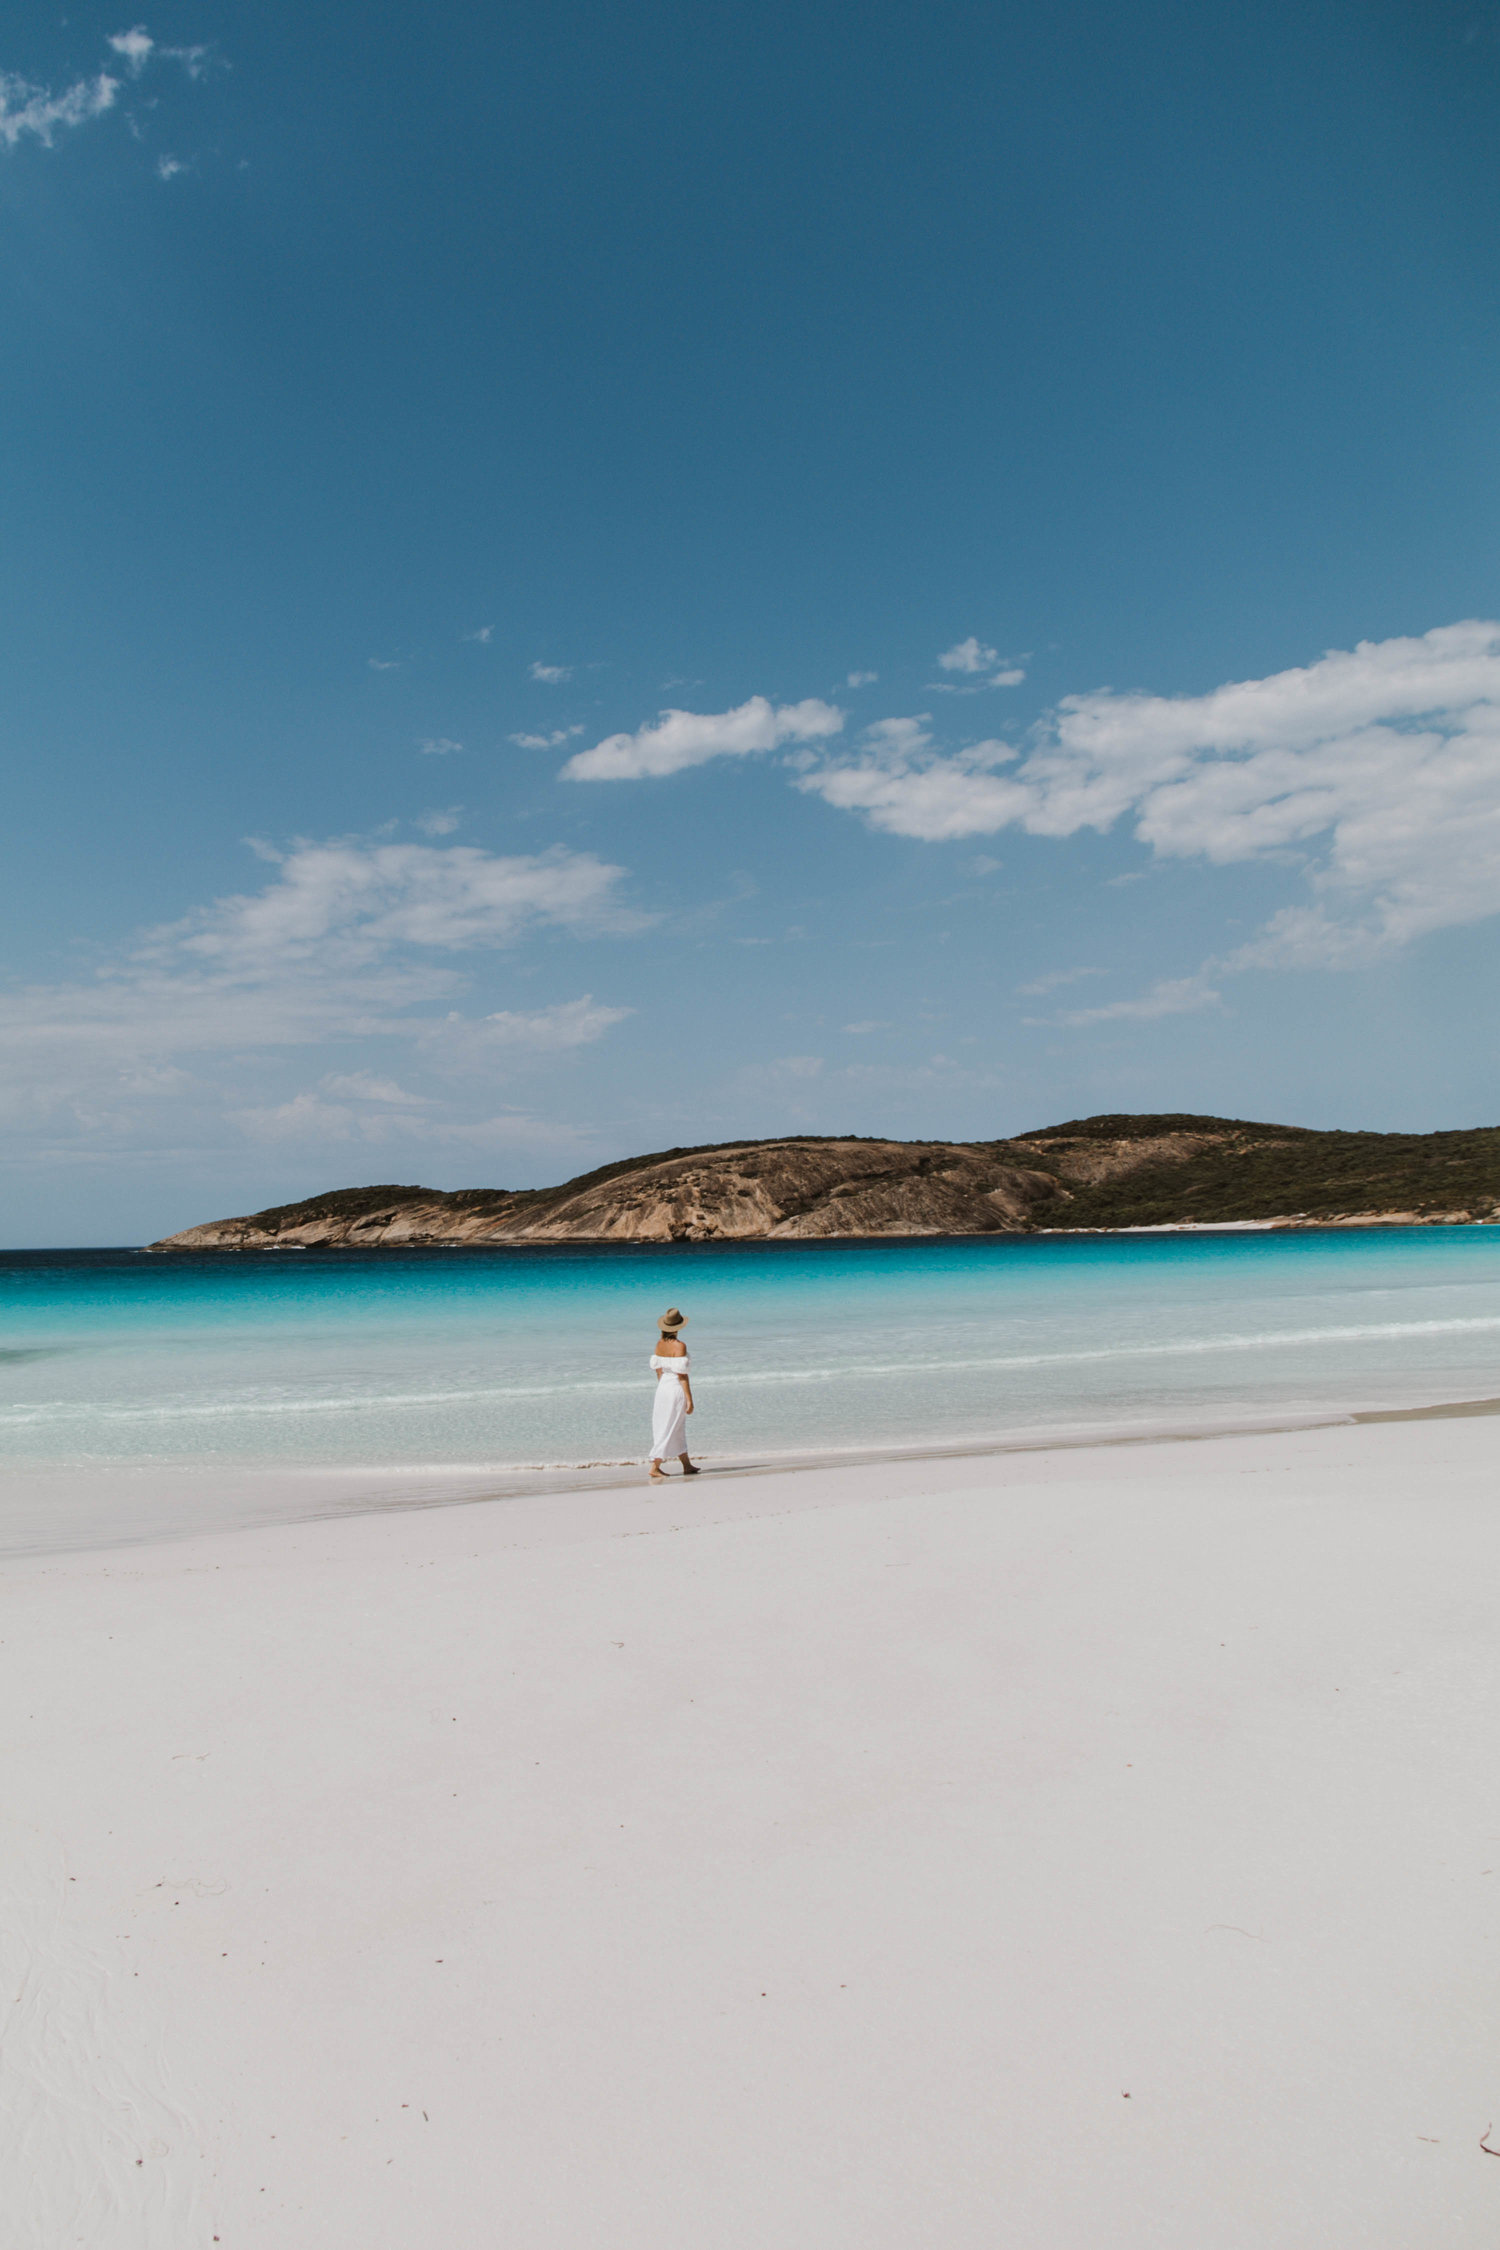 Things to see and do in Esperance, Western Australia